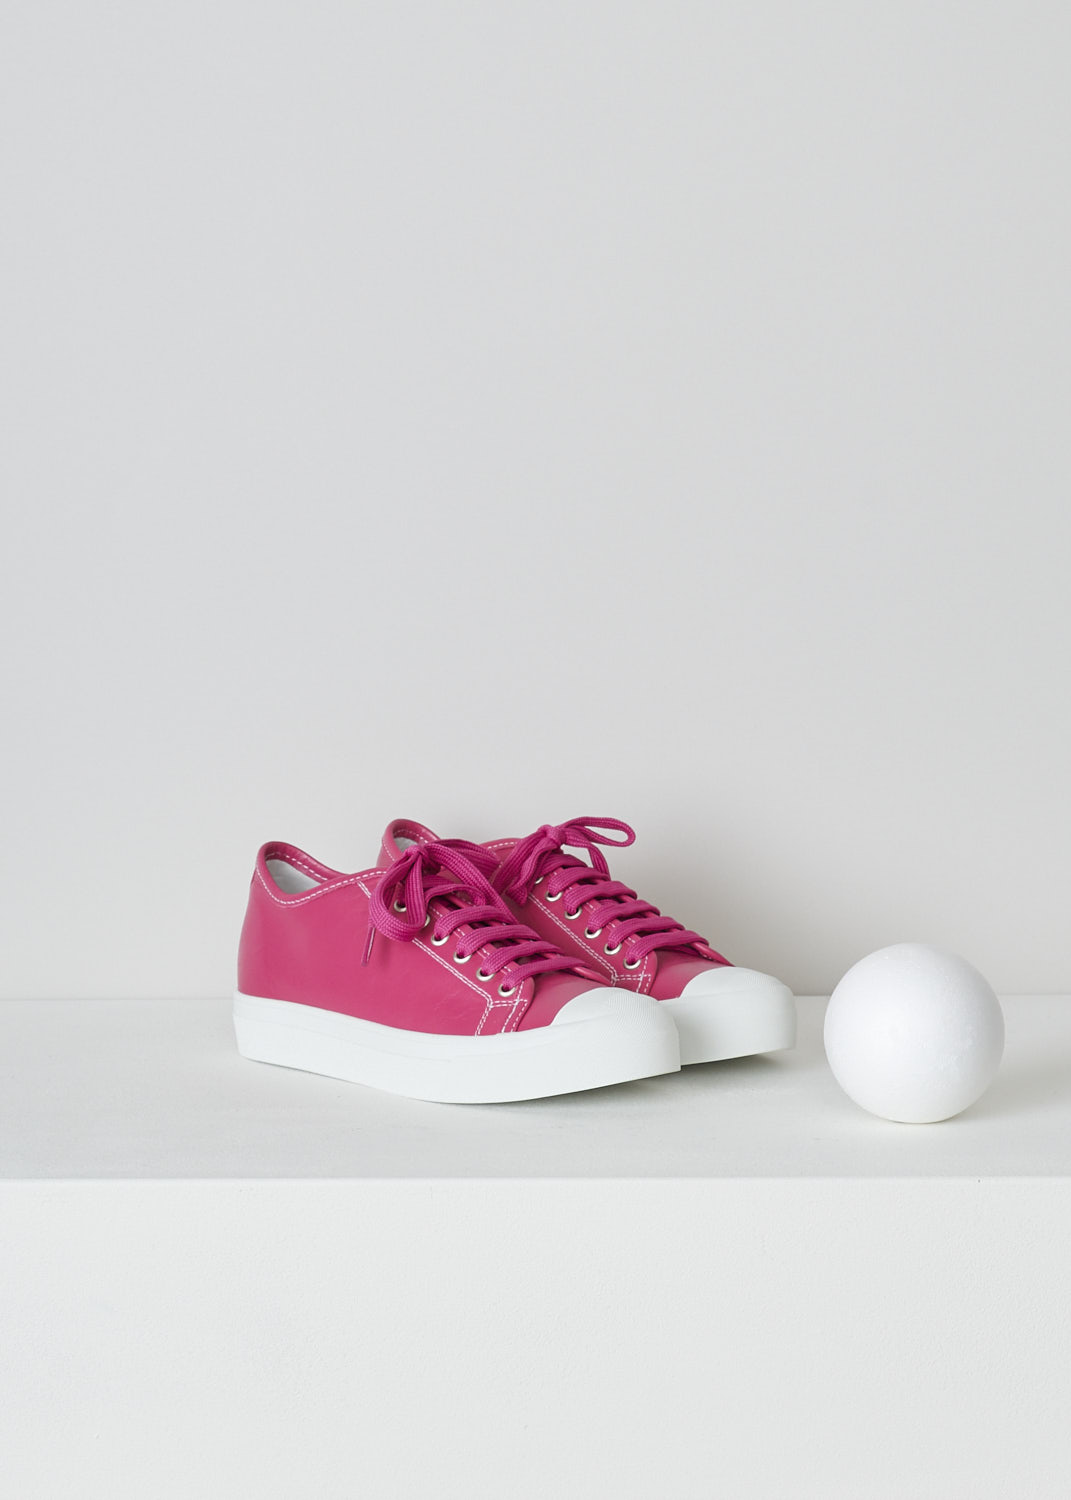 SOFIE Dâ€™HOORE, FUCHSIA PINK LEATHER SHOES, FOLK_LSNOW_FUCHSIA, Pink, Front, These fuchsia pink leather sneakers feature a front lace-up closure with pink laces. These sneakers have a round toe with a white rubber toe cap that goes down into the white rubber sole. Contrasting white stitching is used throughout. The sneakers come with an additional pair of laces in white.
